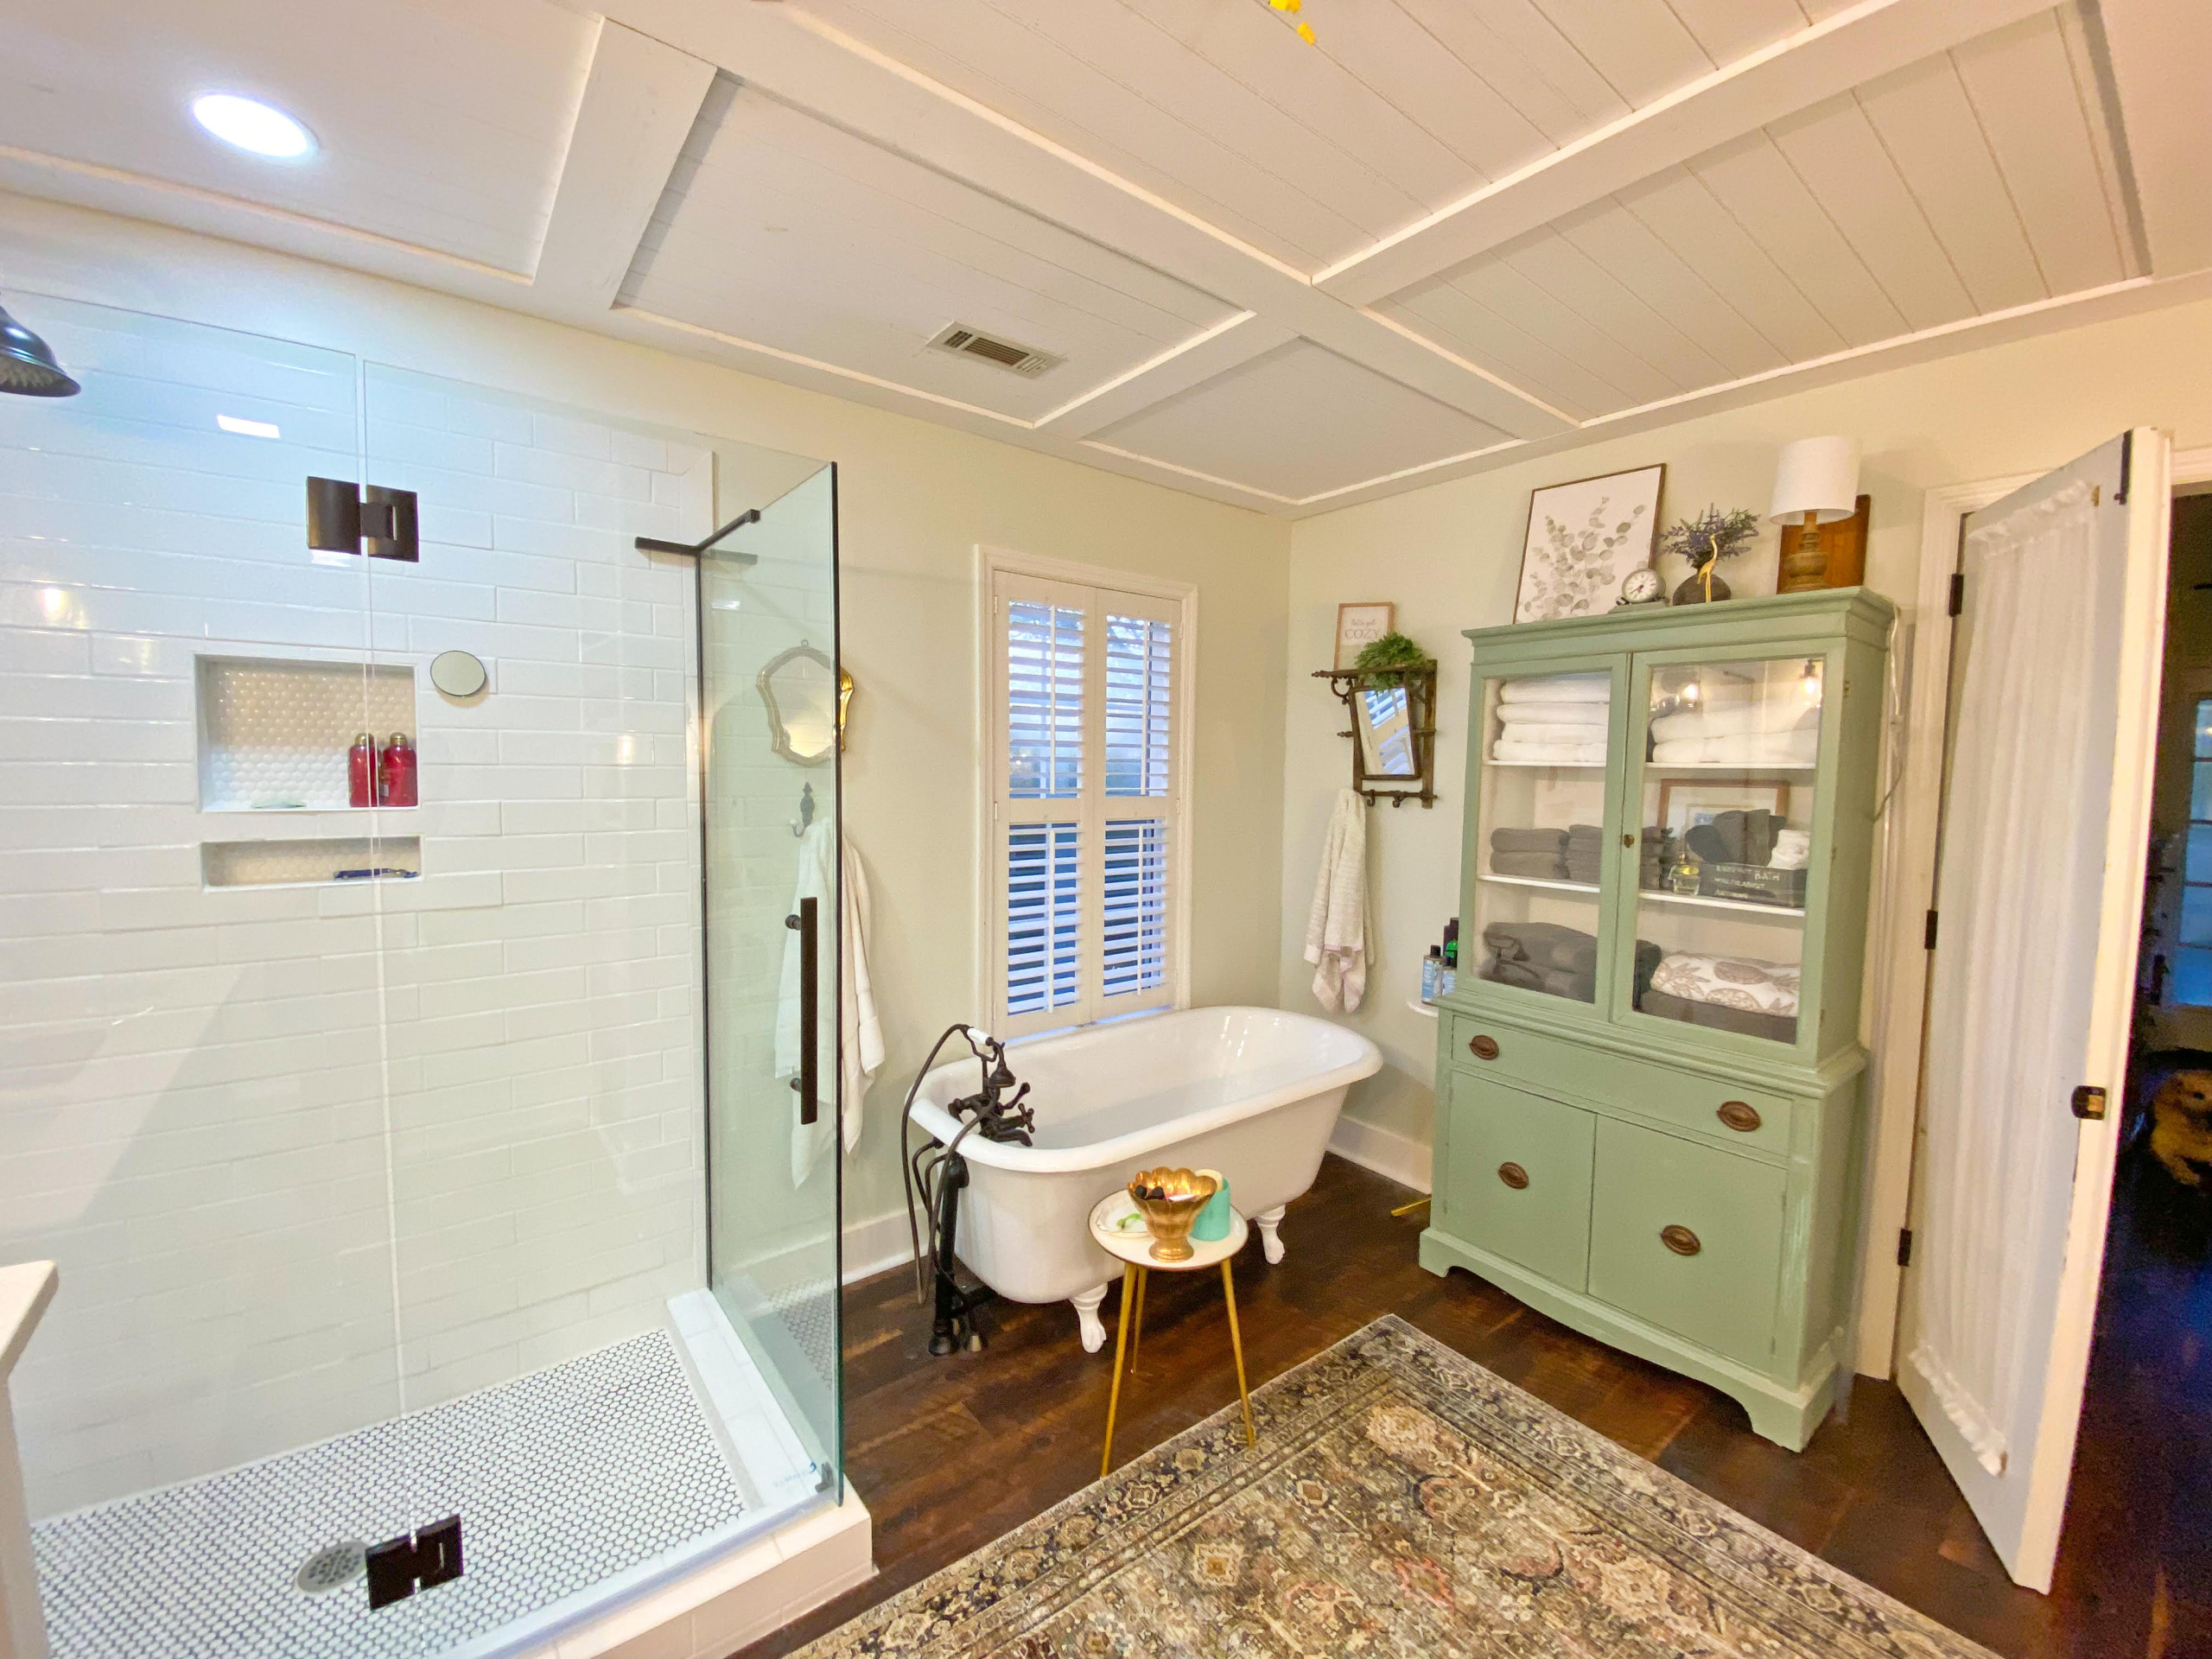 A Classic Bathroom Remodeling Project